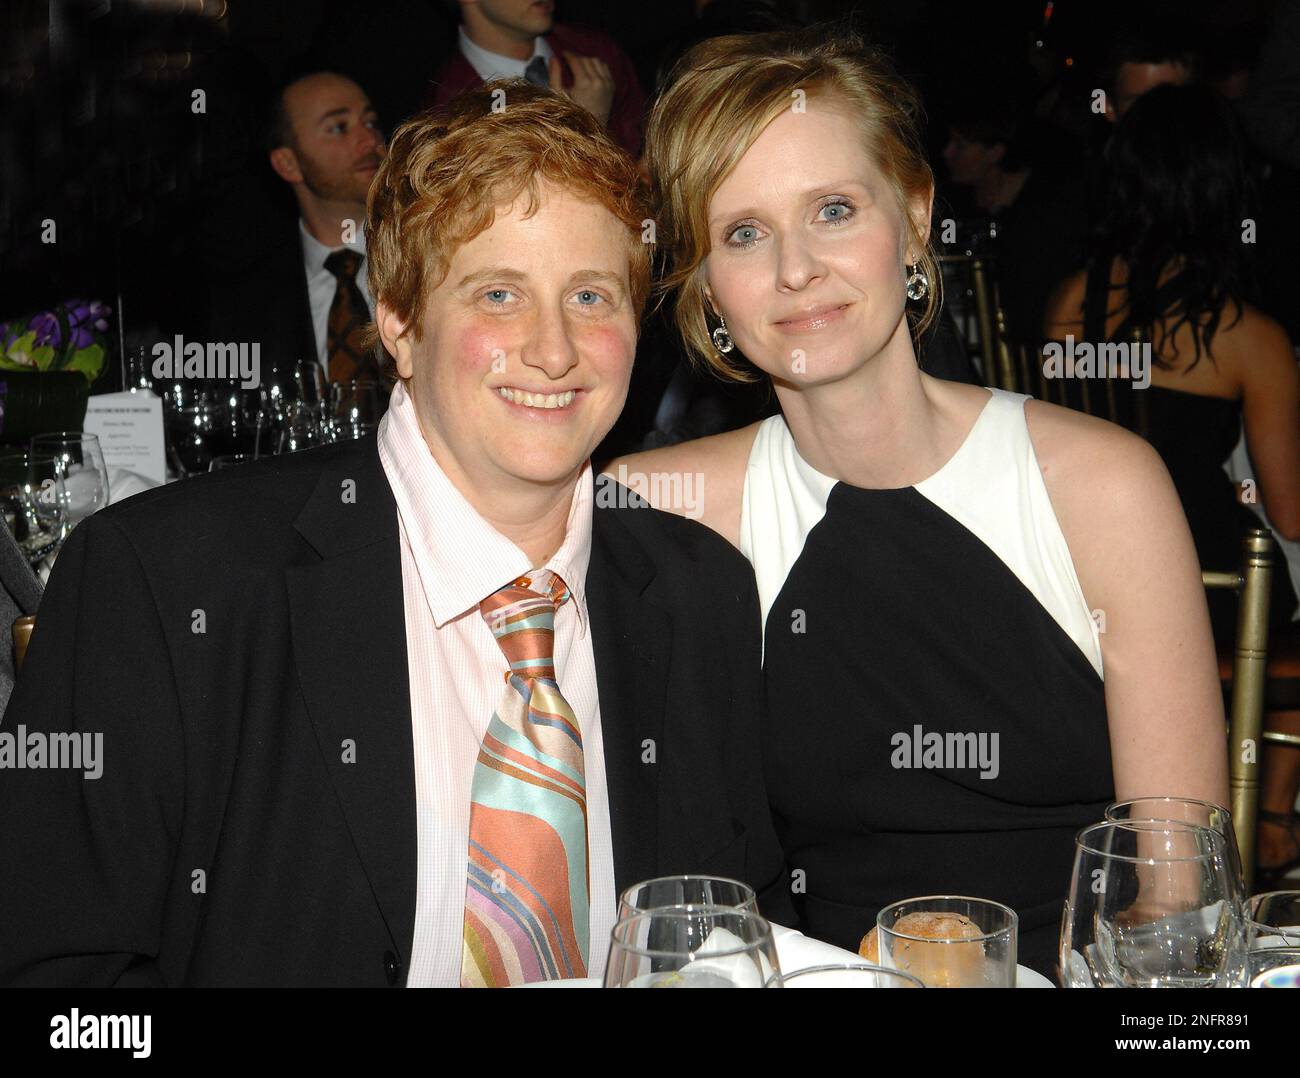 Actress Cynthia Nixon, right, and life partner Christine Marinoni attends the Point Foundation Honors benefit dinner at Capitale, Monday, April 7, 2008 in New York